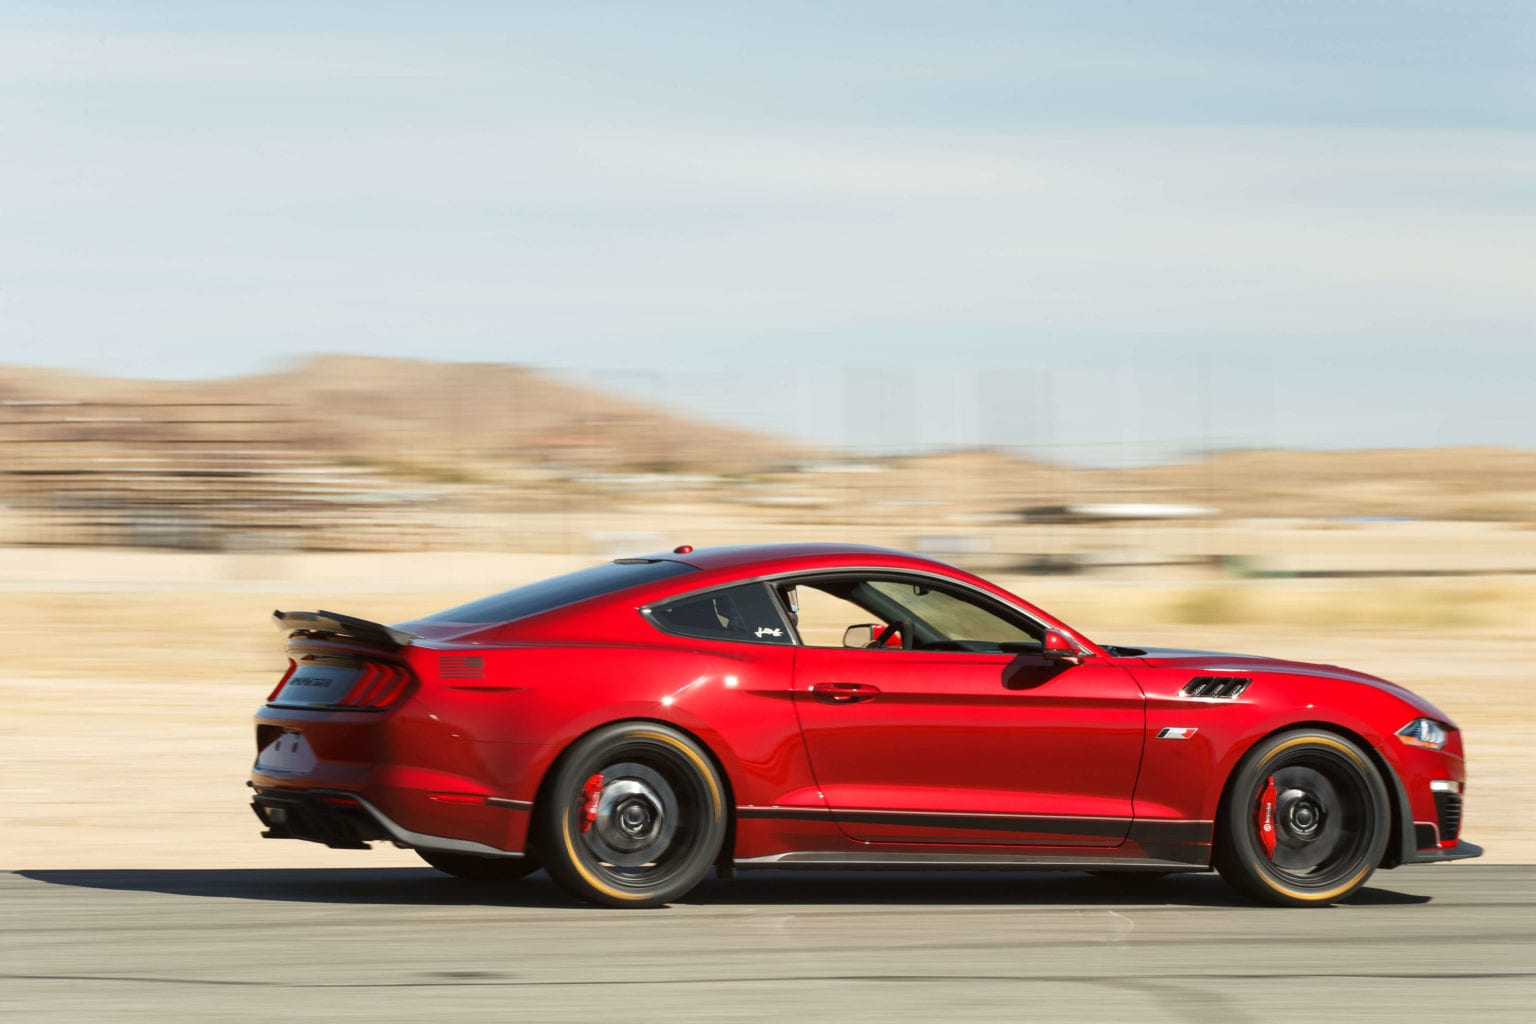 The Fastest ROUSH Mustang to date Jack Roush Edition Mustang